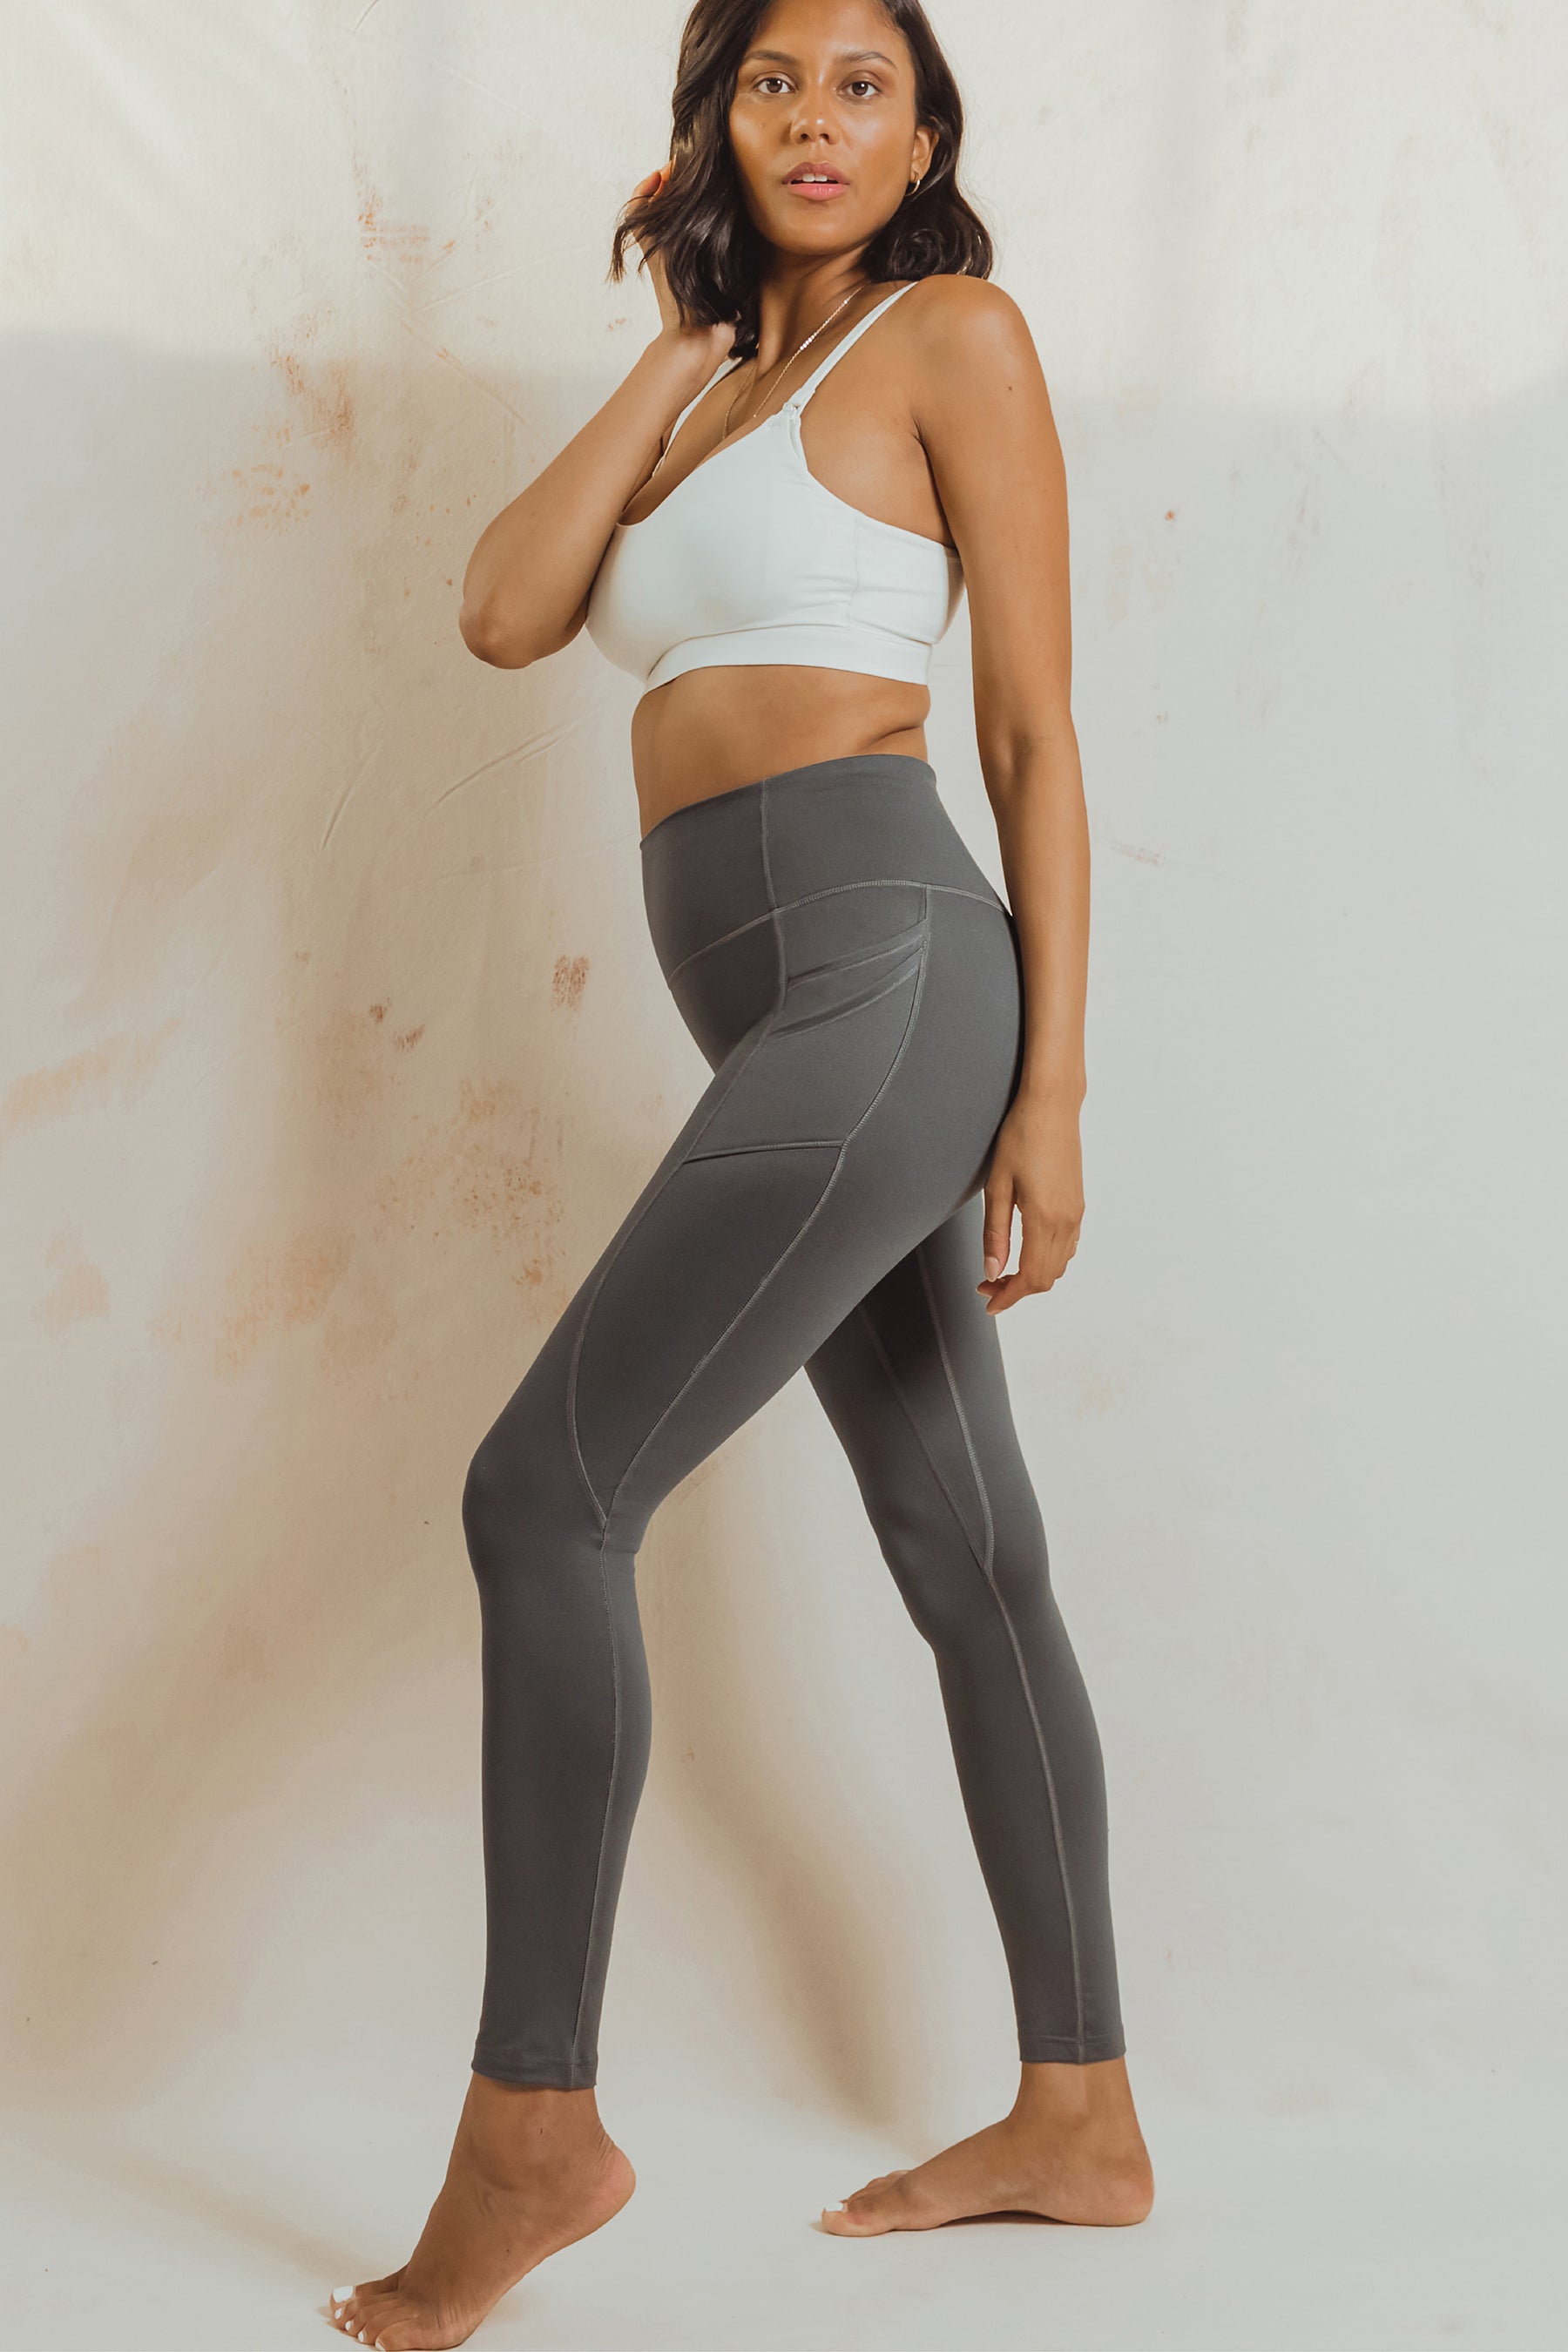 Running Compressive Pockets Legging as comfortable as your